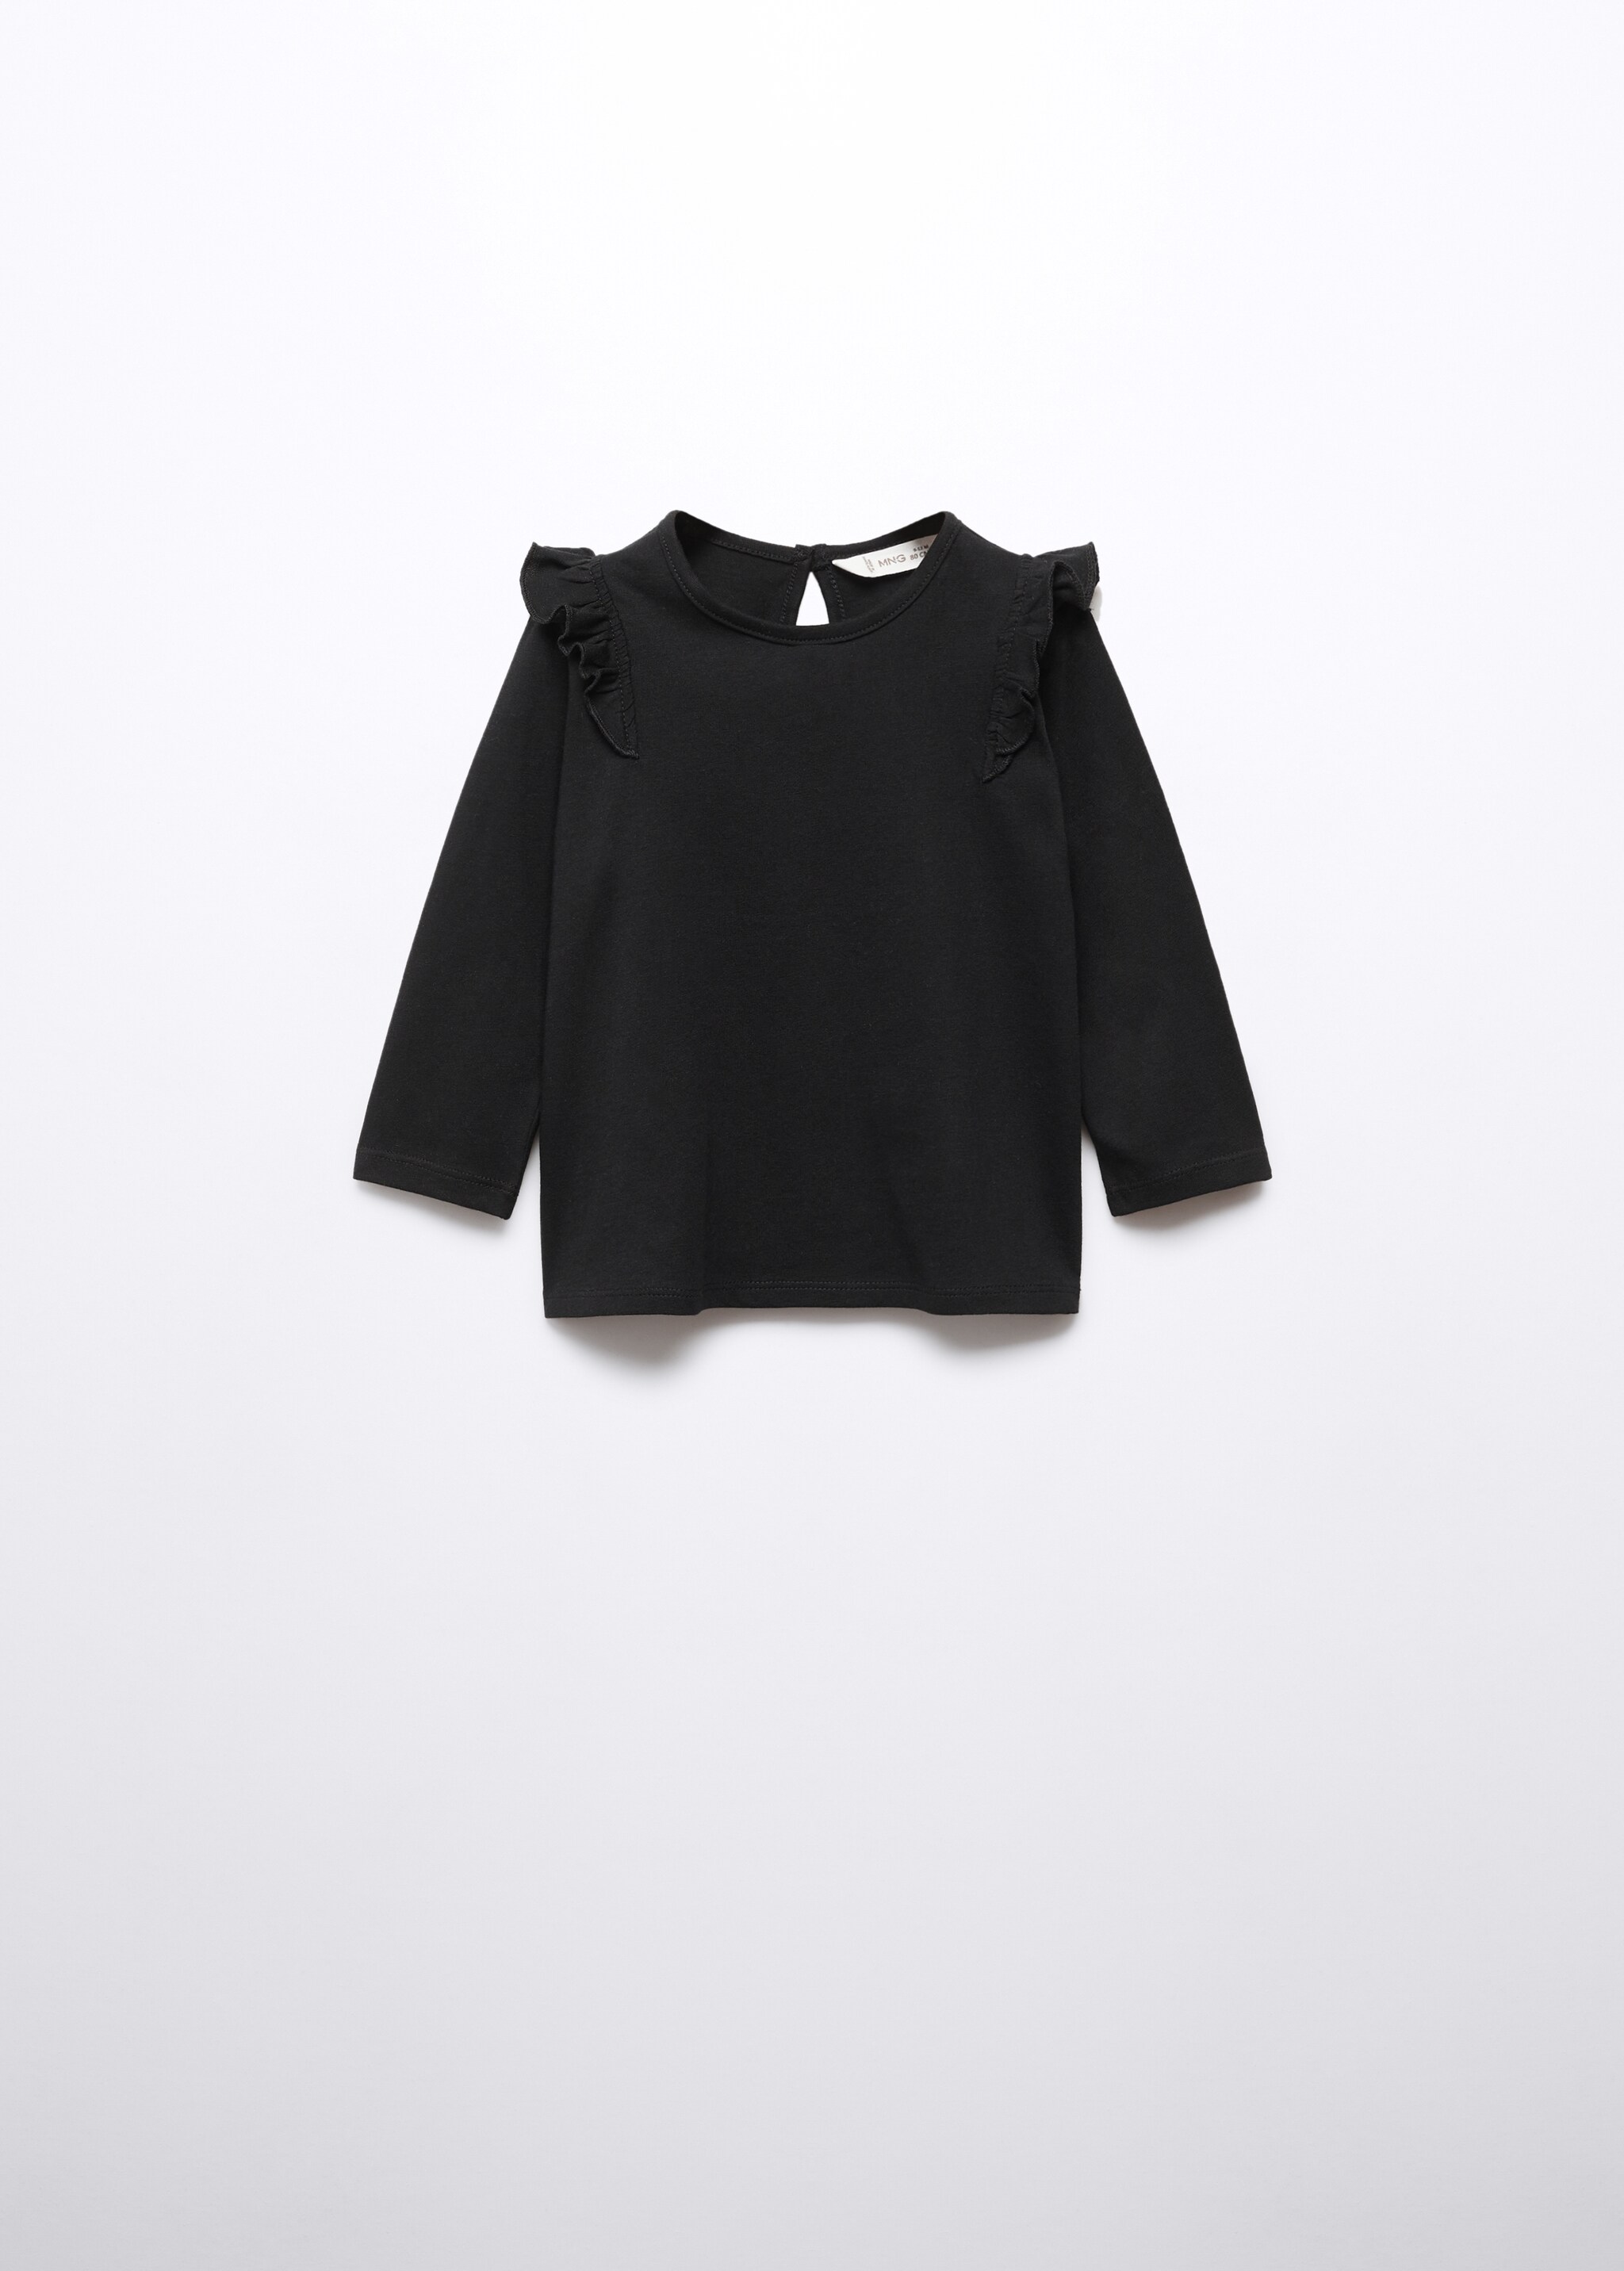 Long -sleeved t-shirt with ruffles - General plane